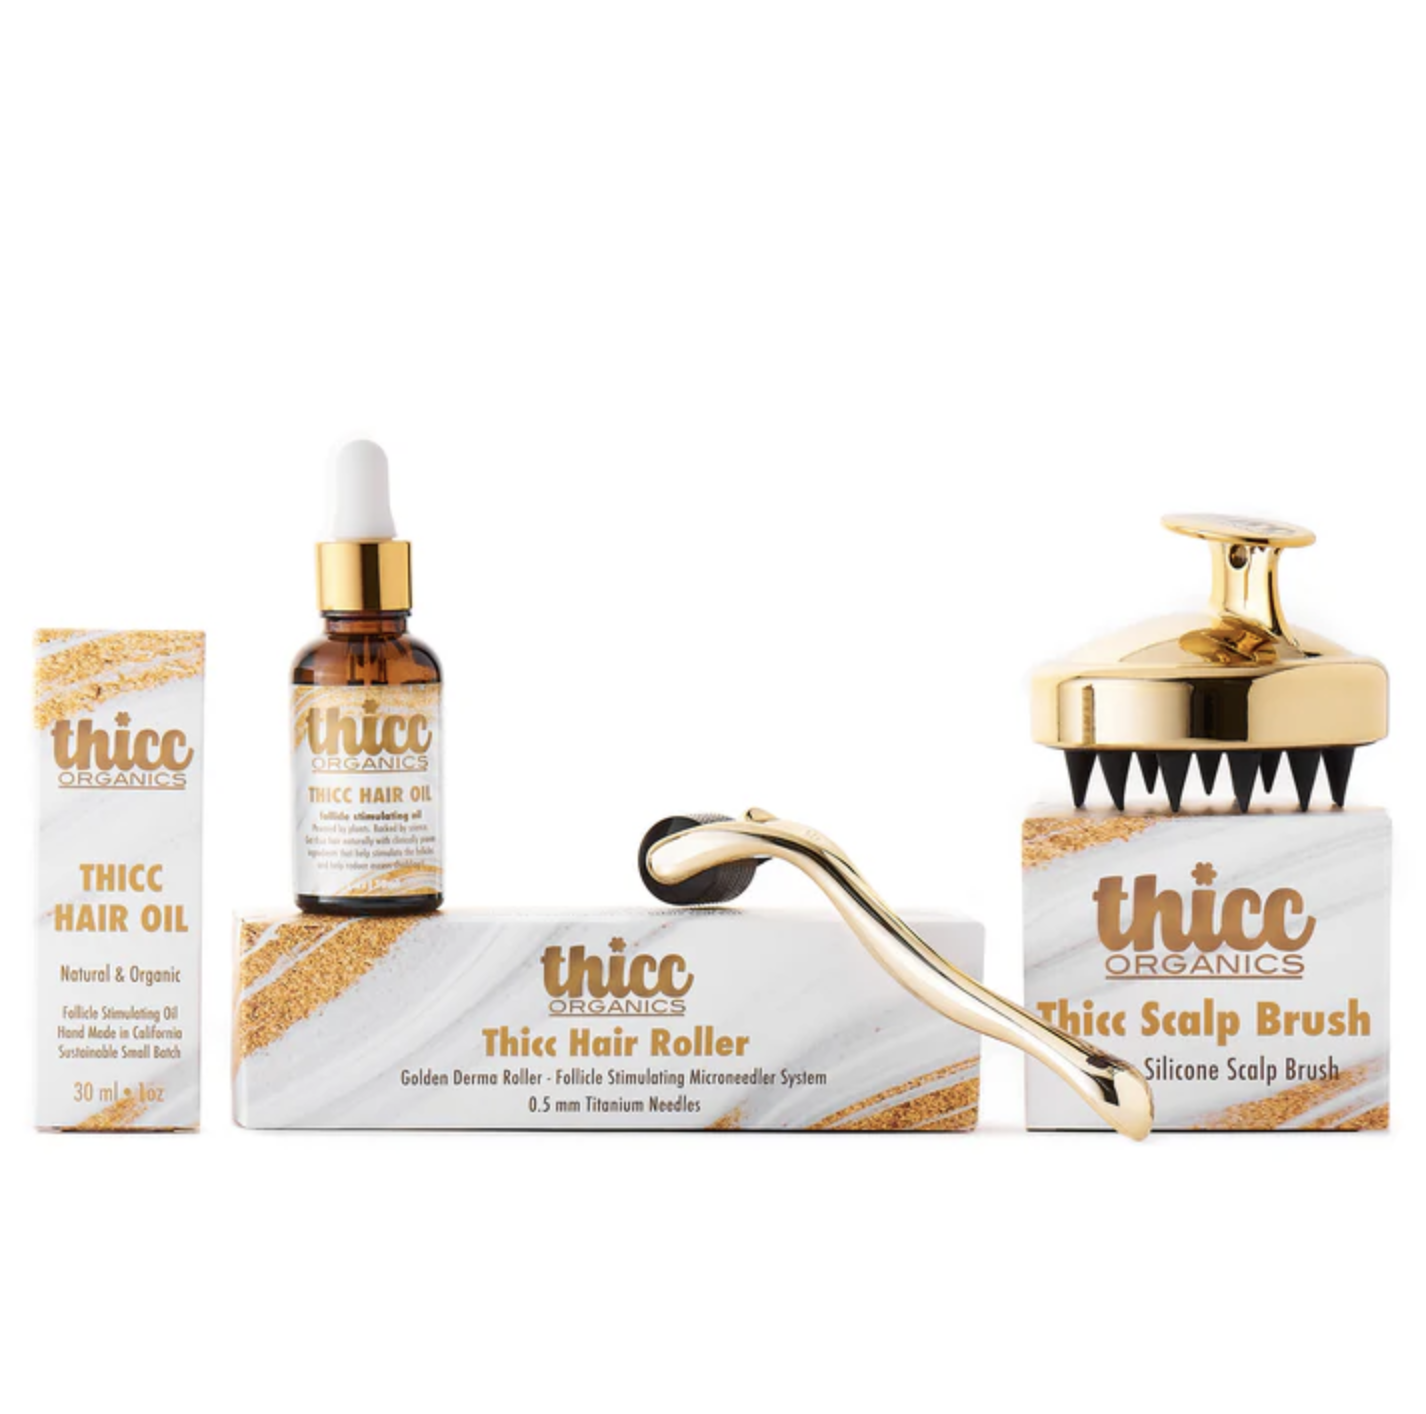 Three Thicc Organics hair care products: Hair Oil, Hair Roller, and Scalp Brush